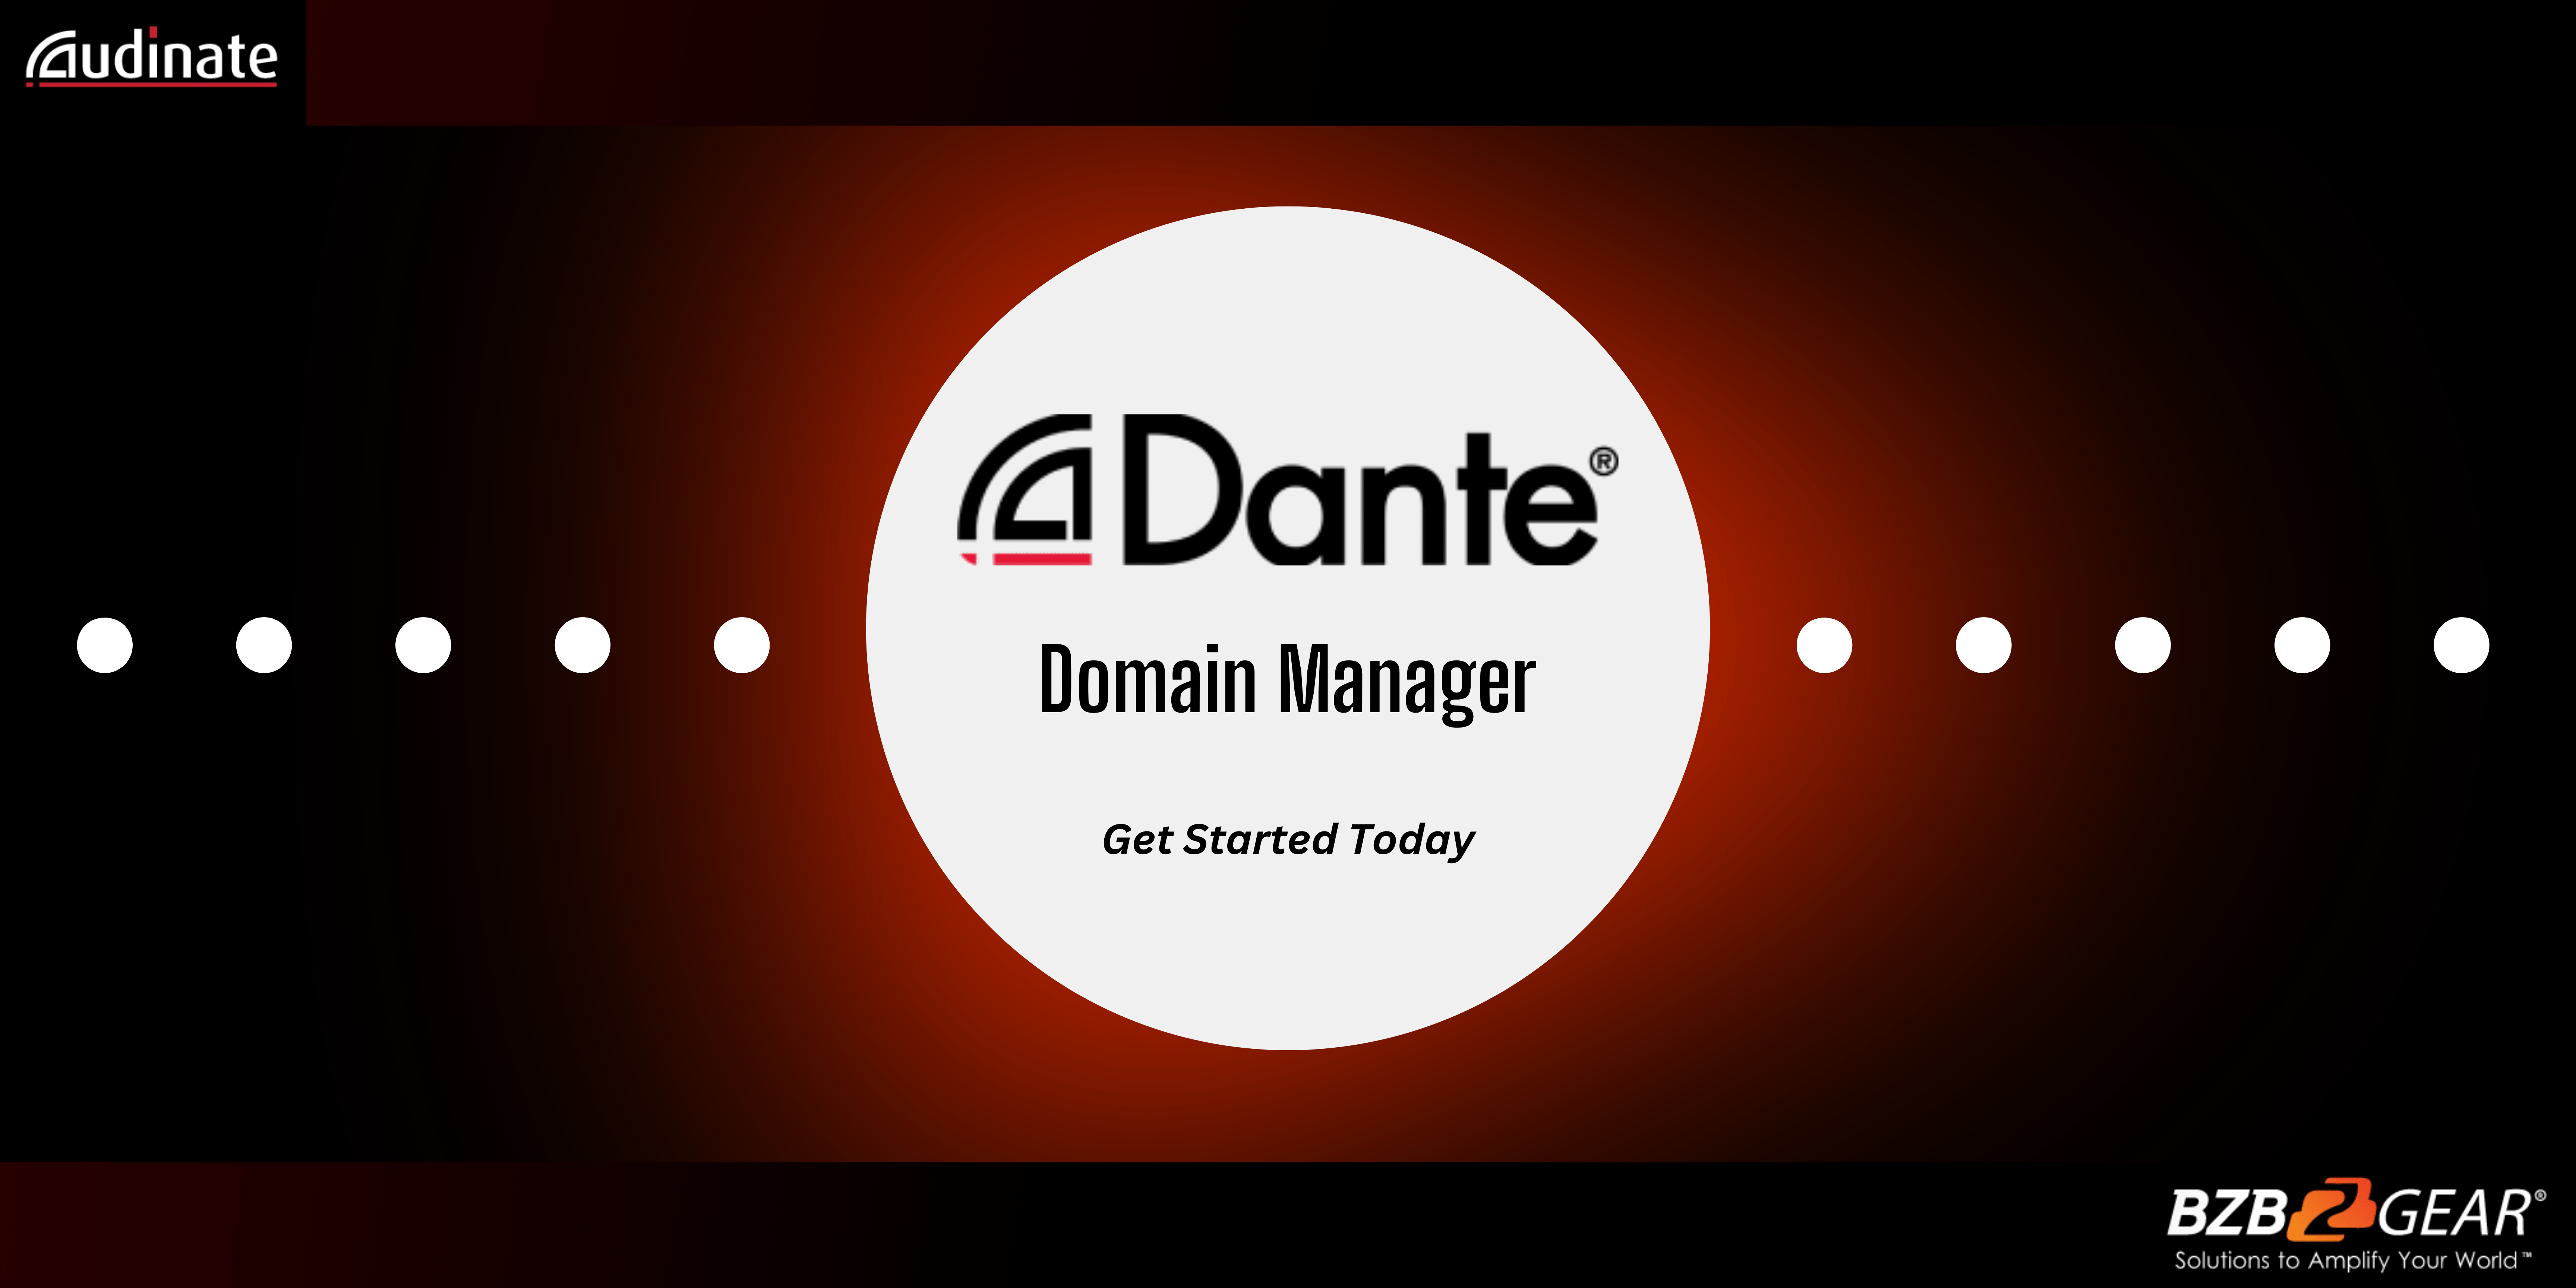 How to find out my domain manager